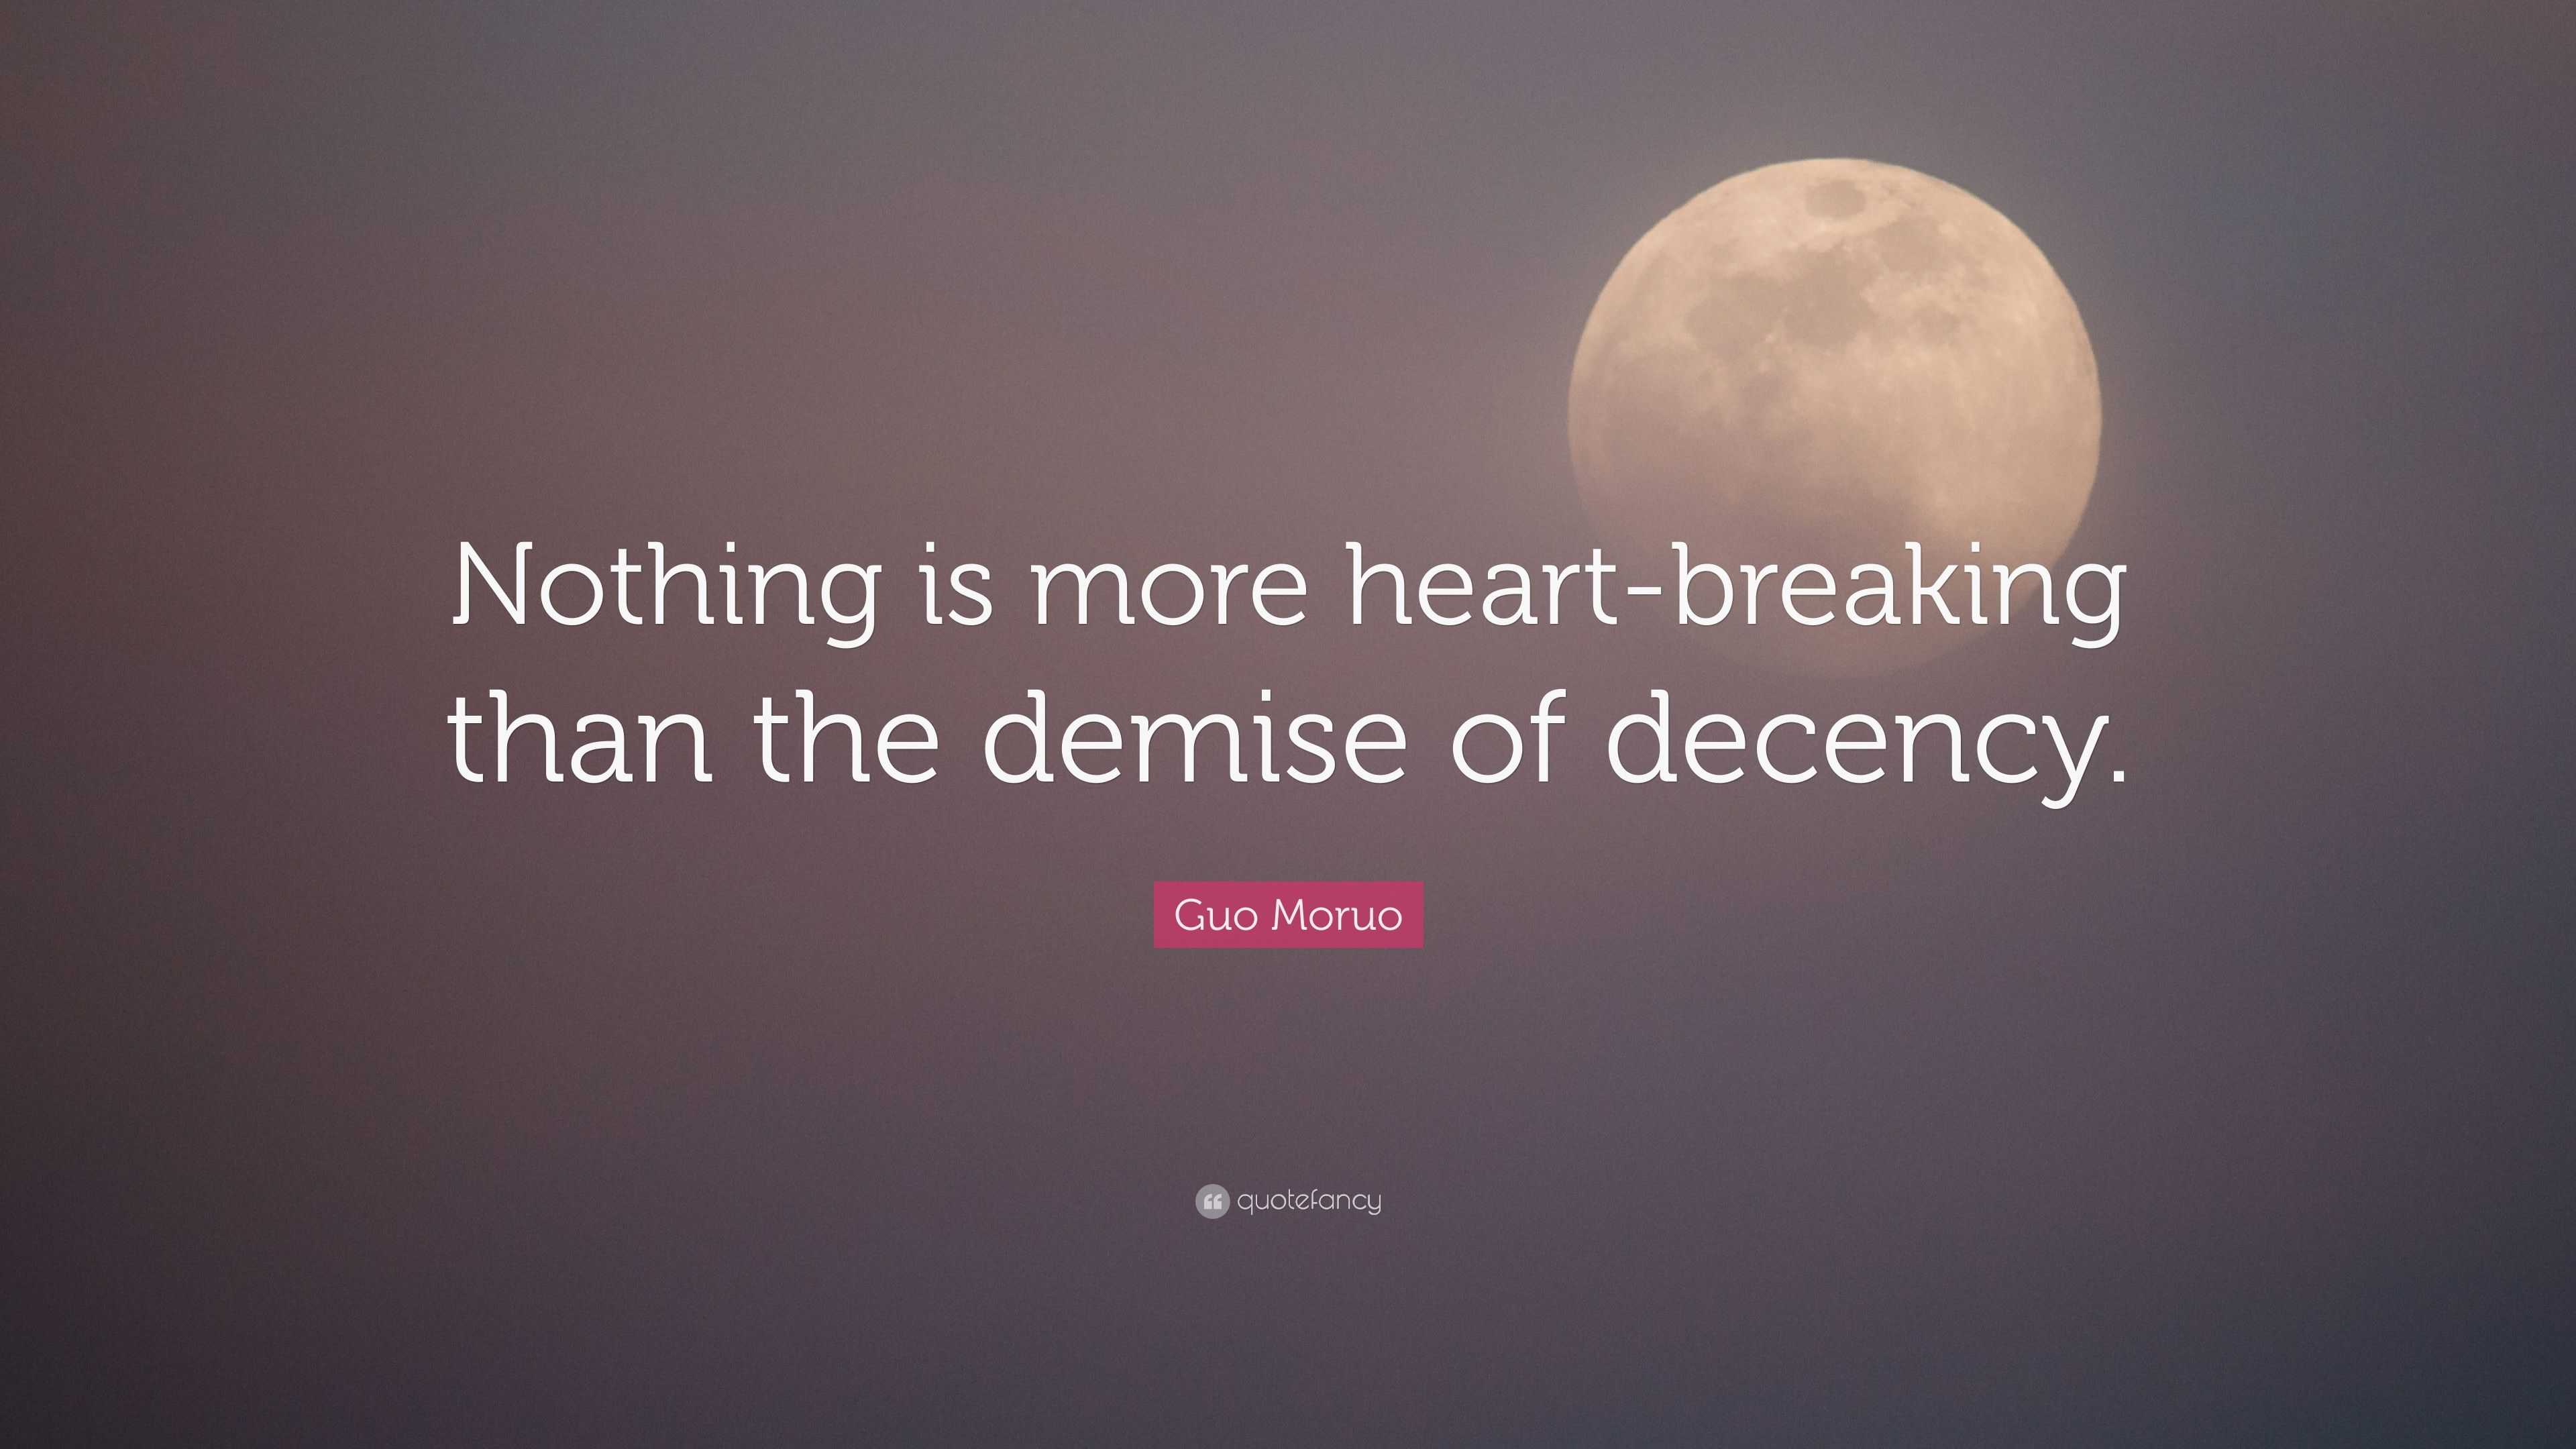 Guo Moruo Quote: “Nothing is more heart-breaking than the demise of ...